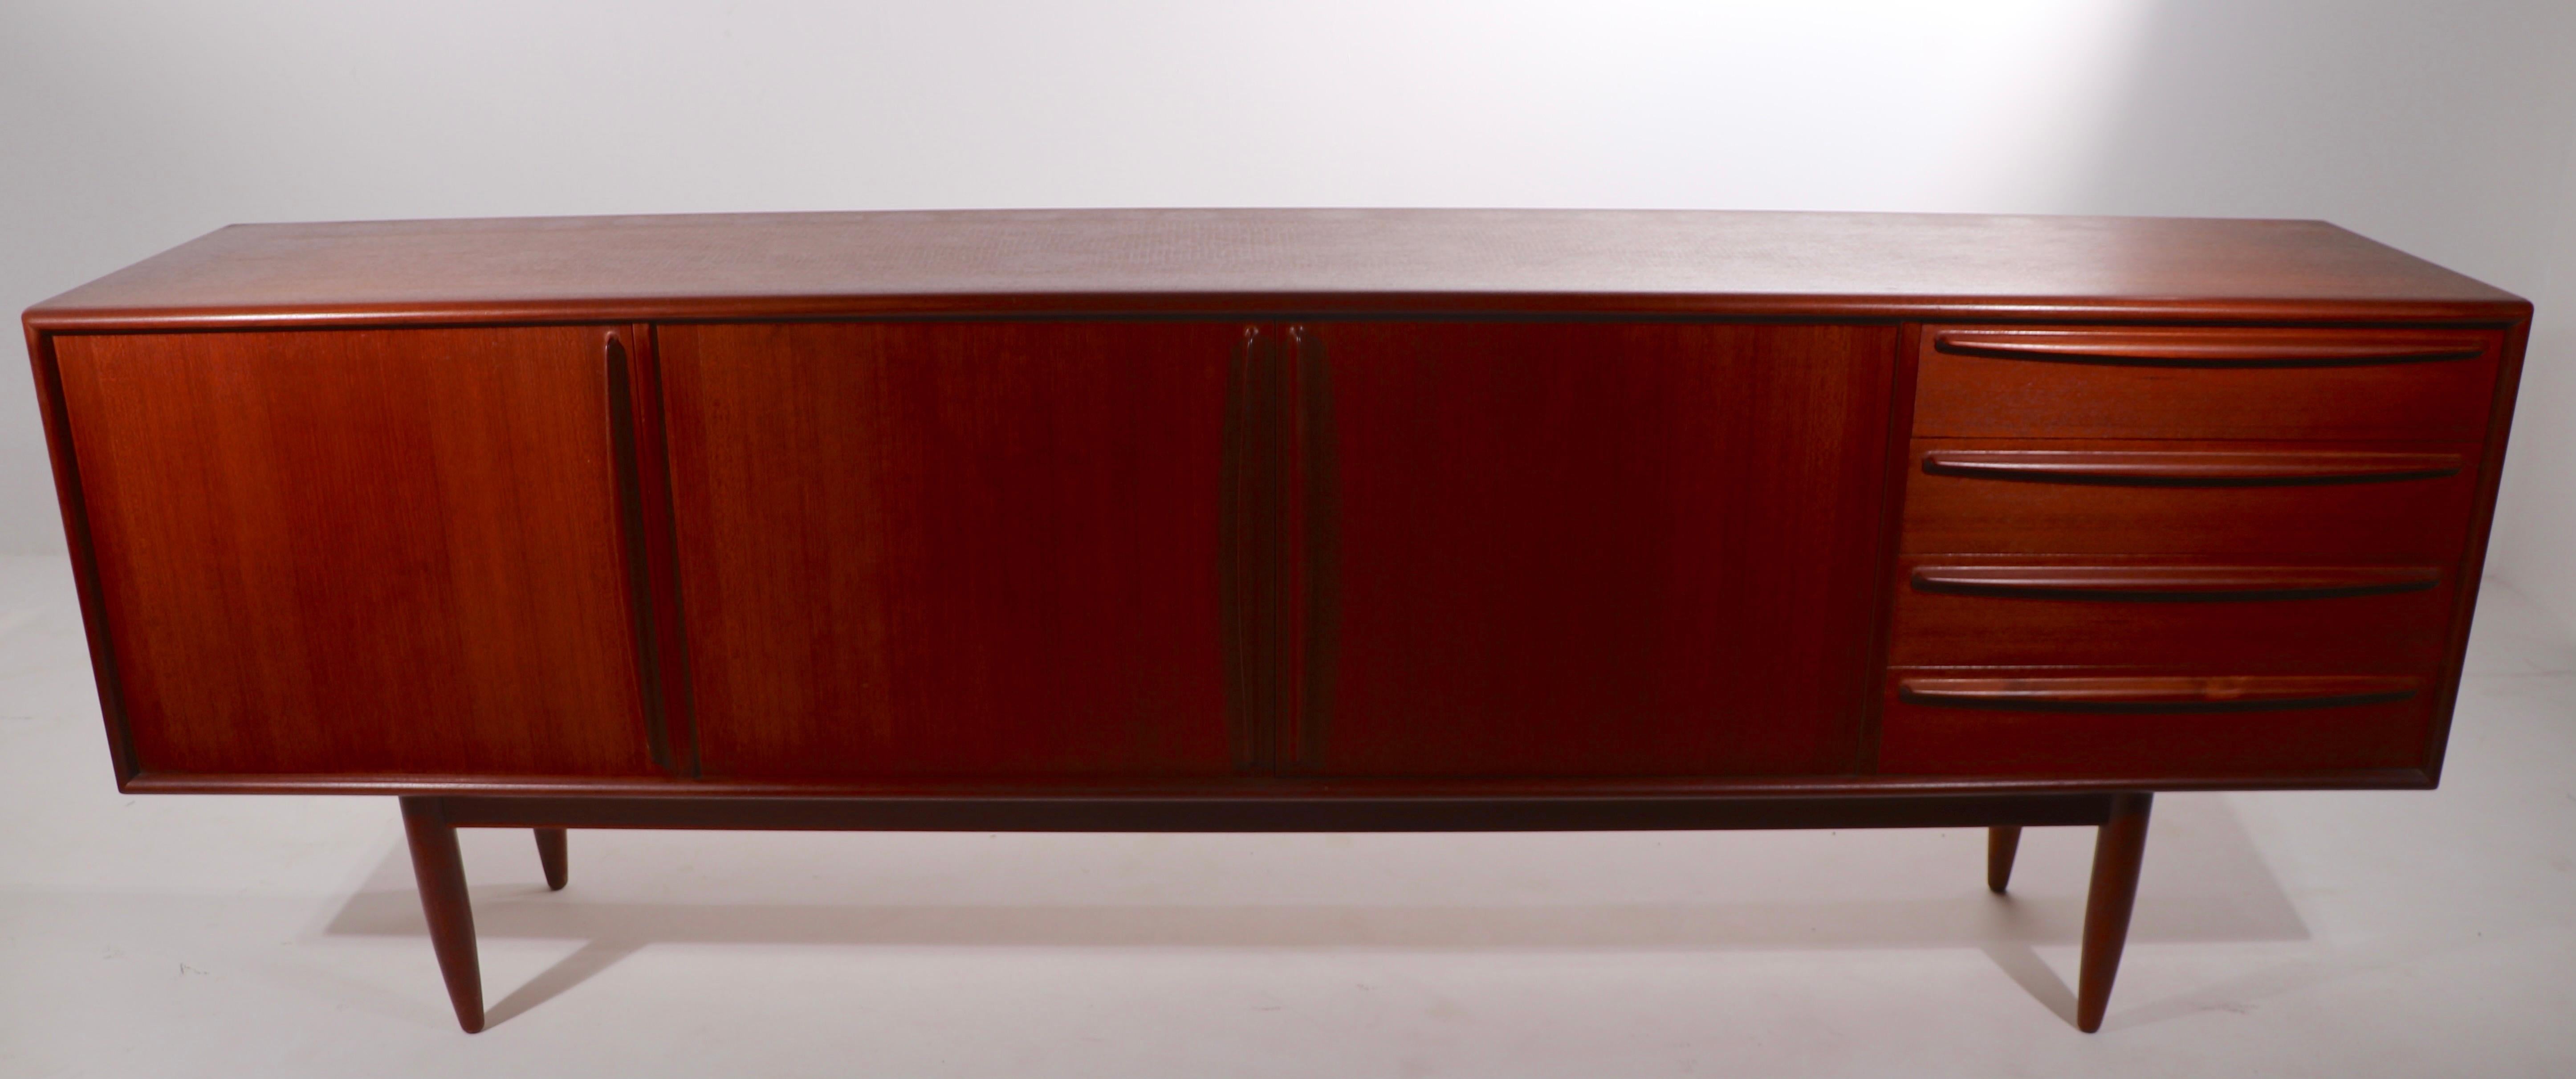 Spectacular large (95.75 in W) Danish modern sideboard, dry bar, credenza. This example features a bank of our drawers which flank two center doors, which open to shelved storage, and a fourth door that opens to a dry bar cabinet. The credenza is in